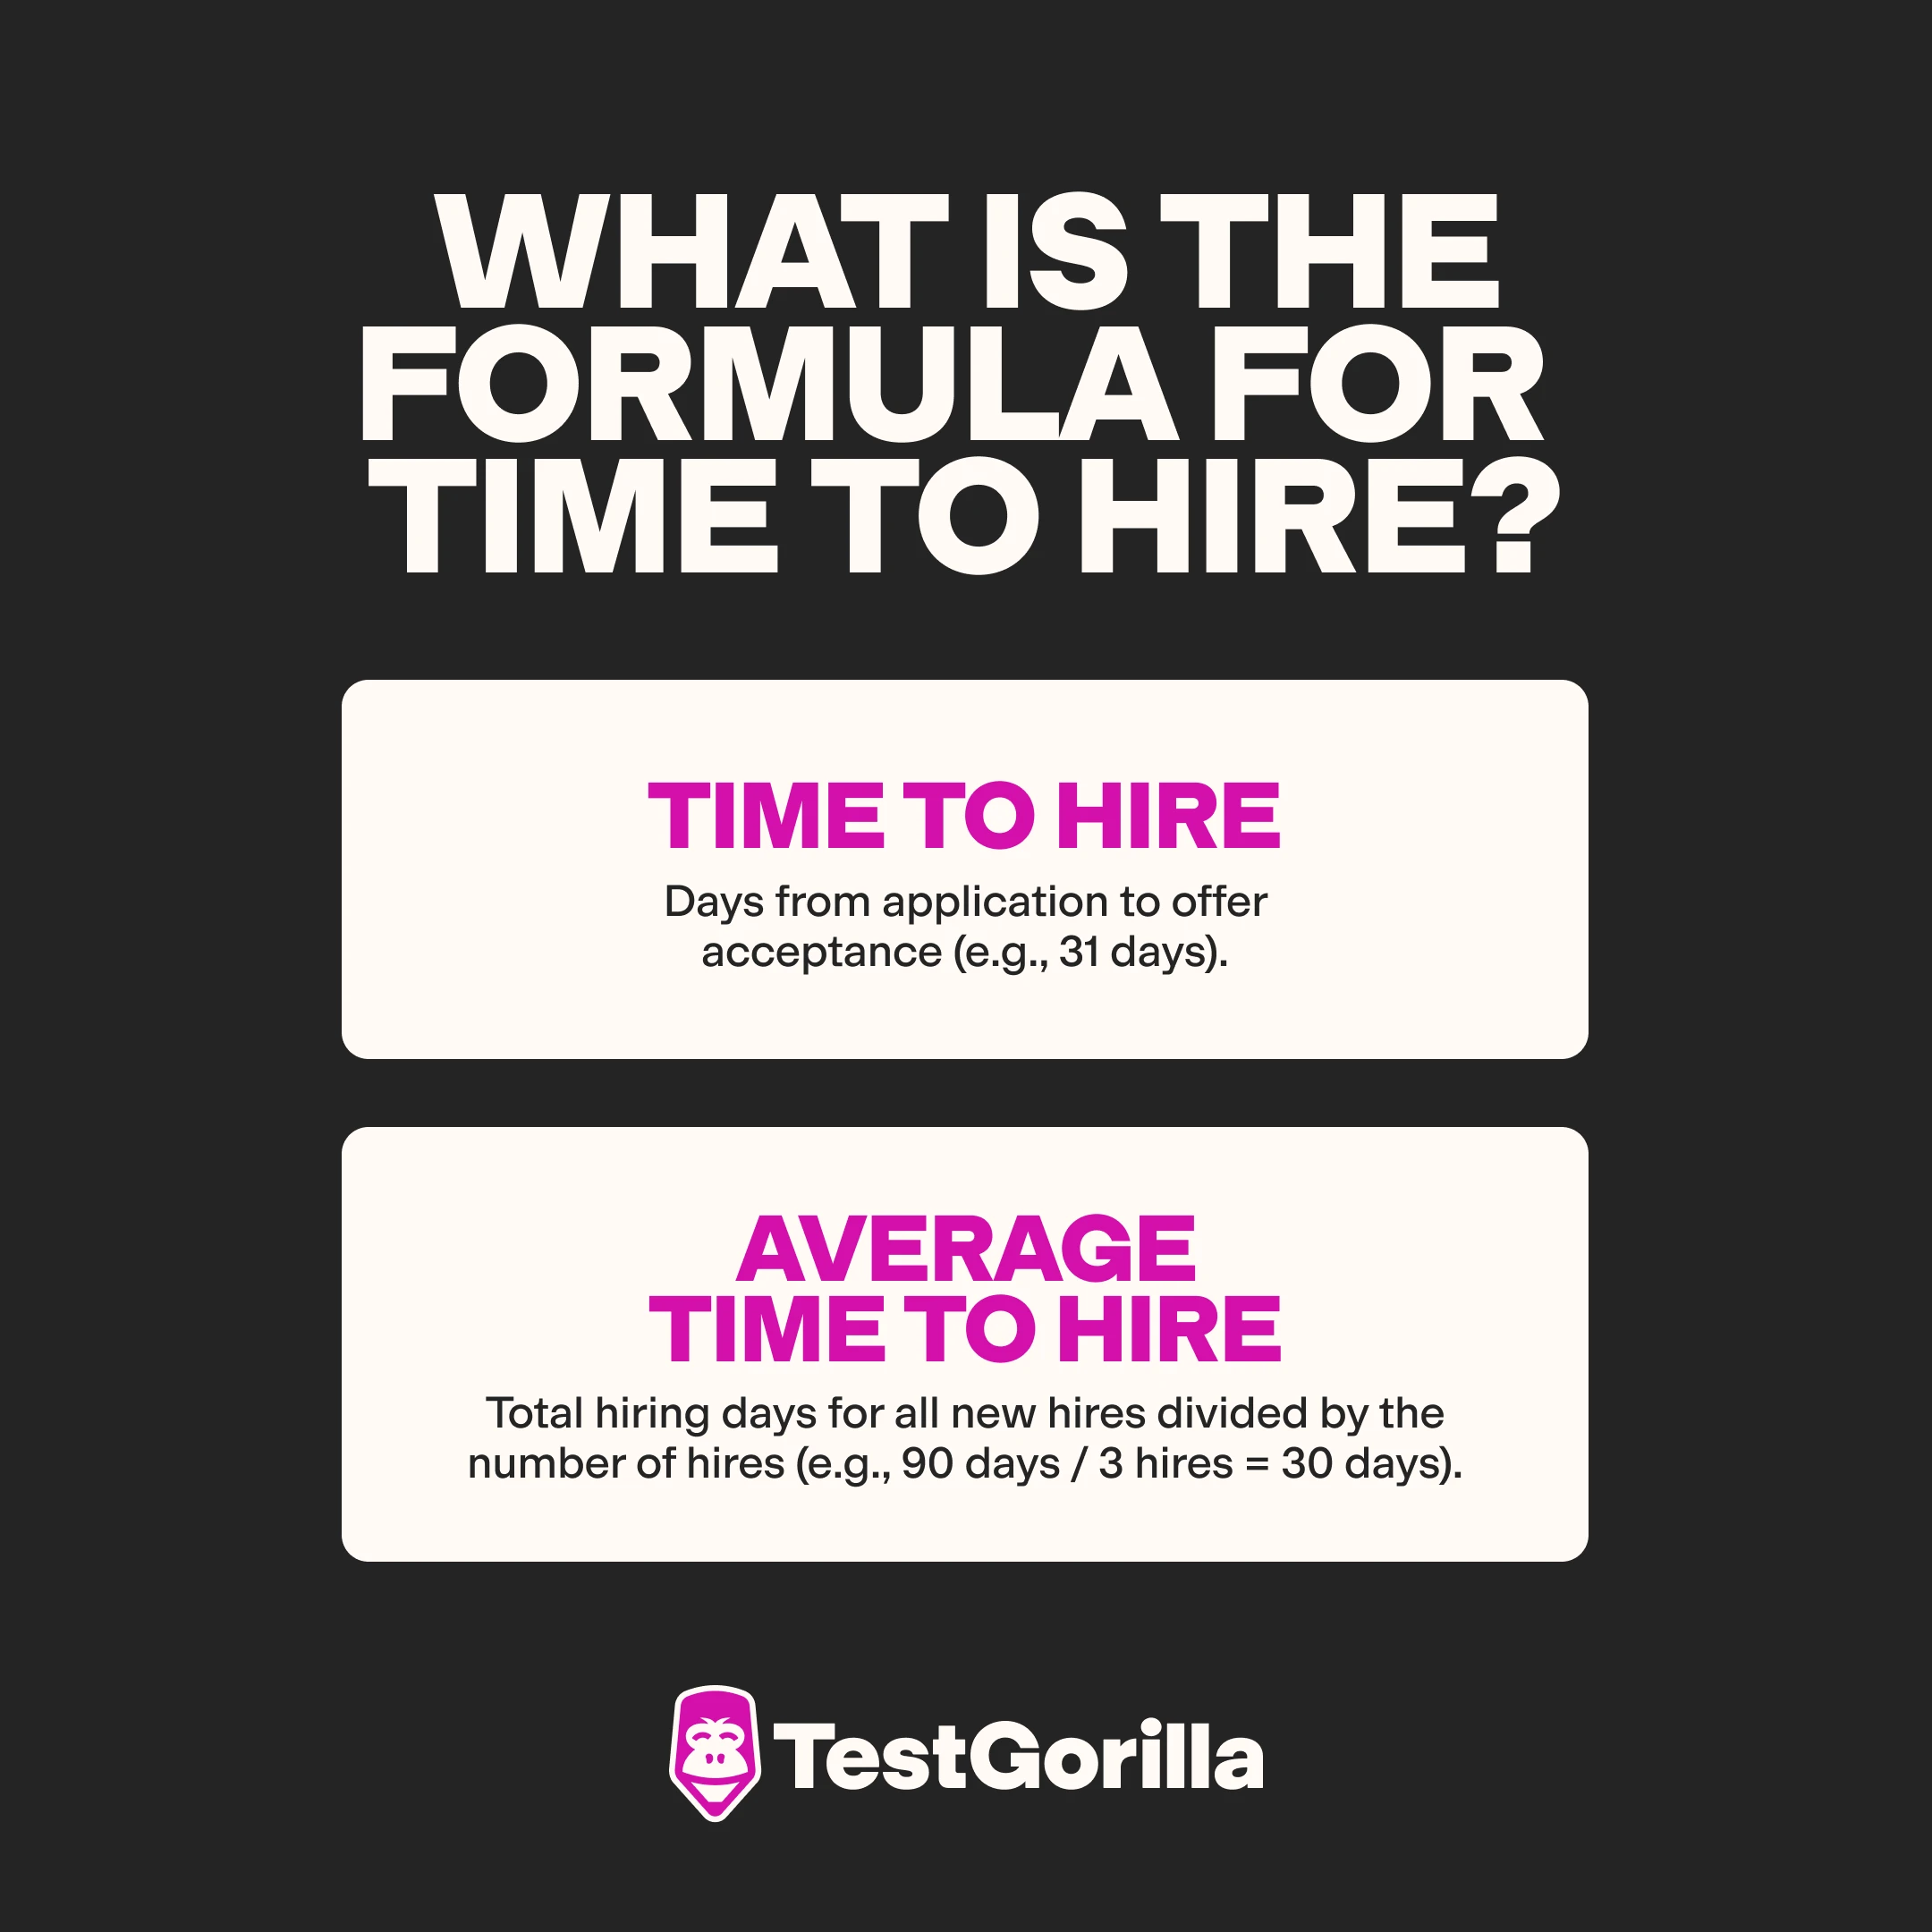 What is the formula for time to hire graphic